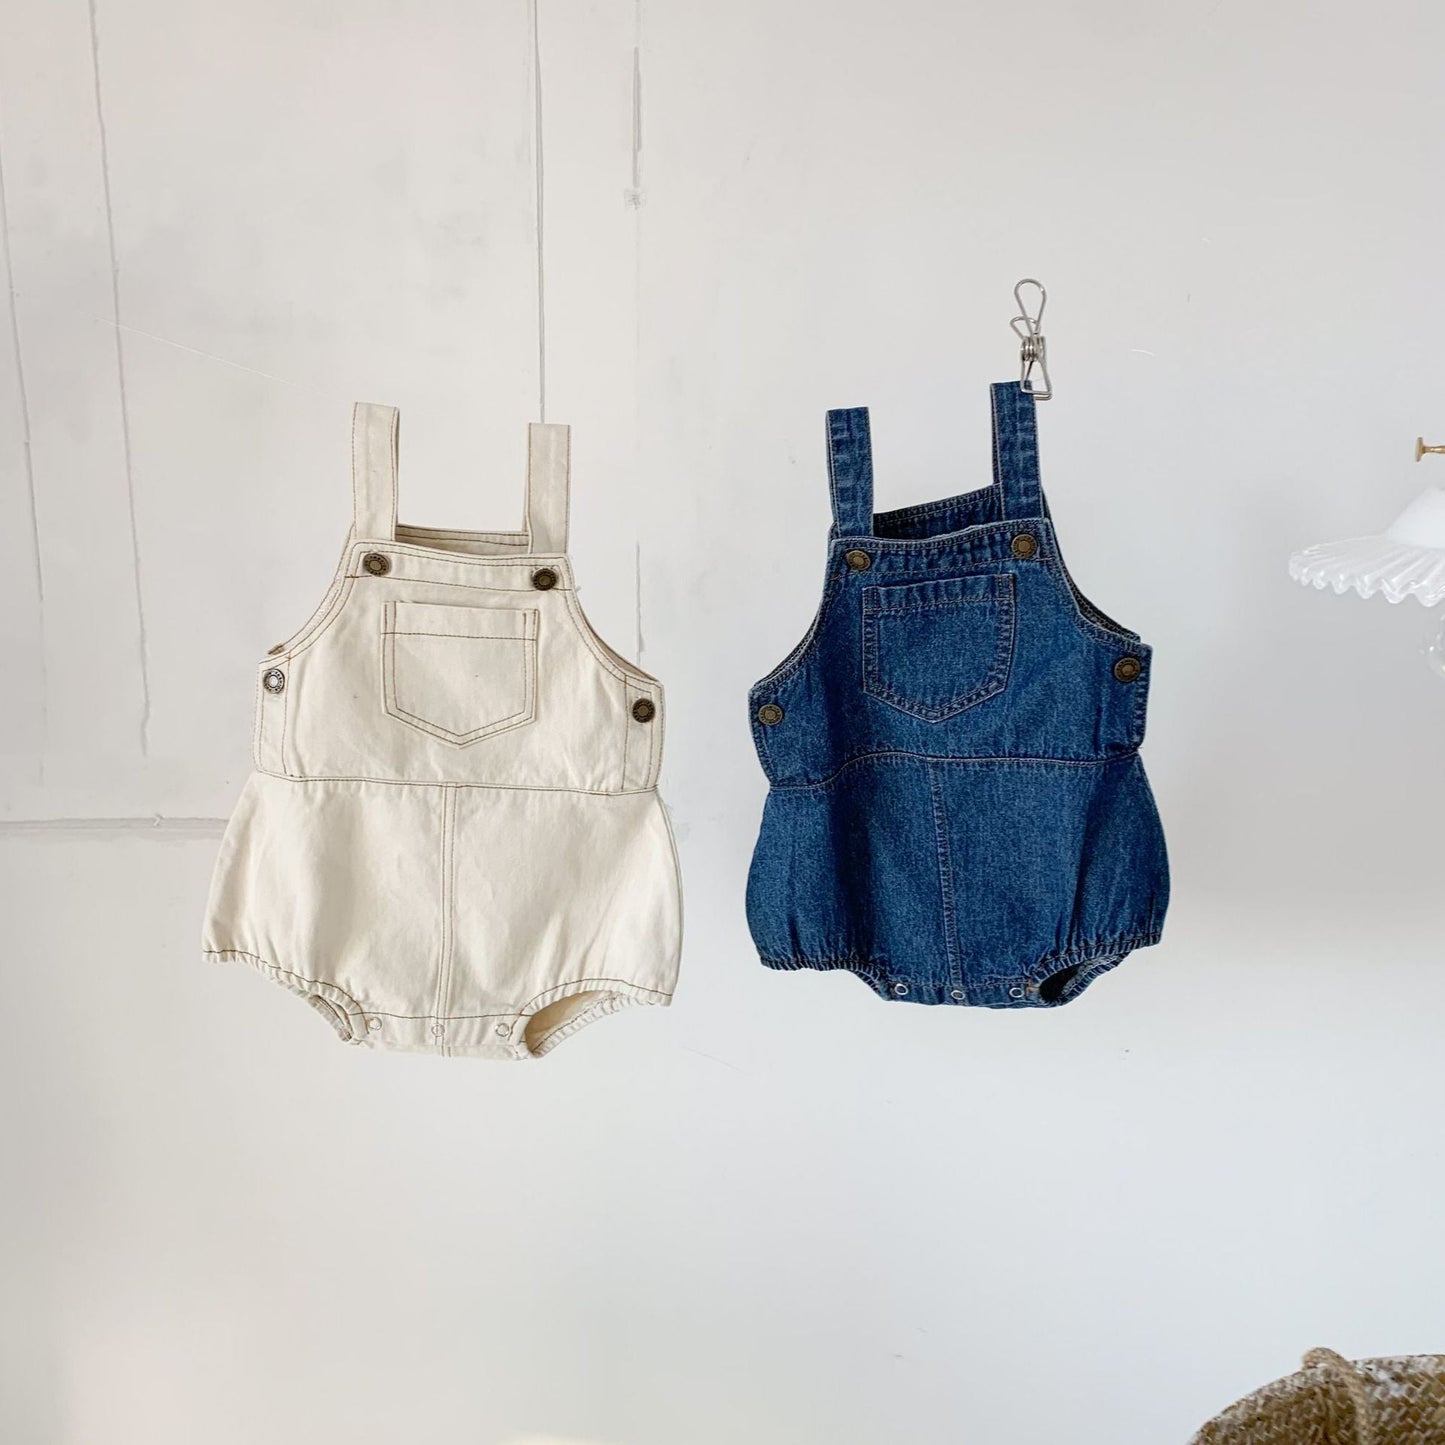 Denim Baby Clothing - Stylish and Comfortable Overalls and T-Shirts